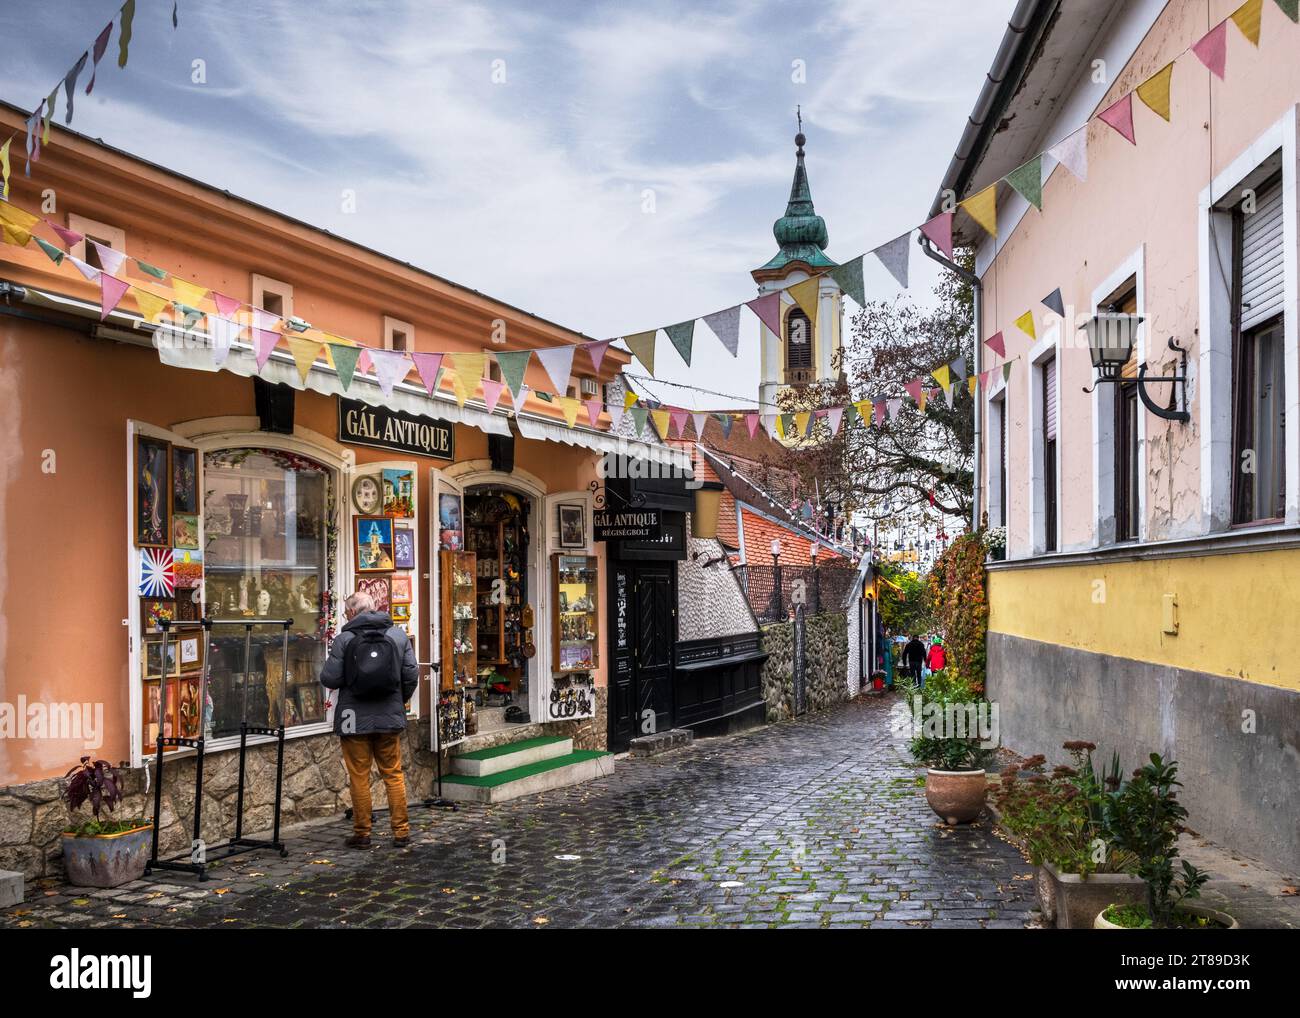 Szentendre is a town nestled in Pest County that has earned the nickname of the 'Artist's Village' due to its rich artistic heritage and its thriving Stock Photo